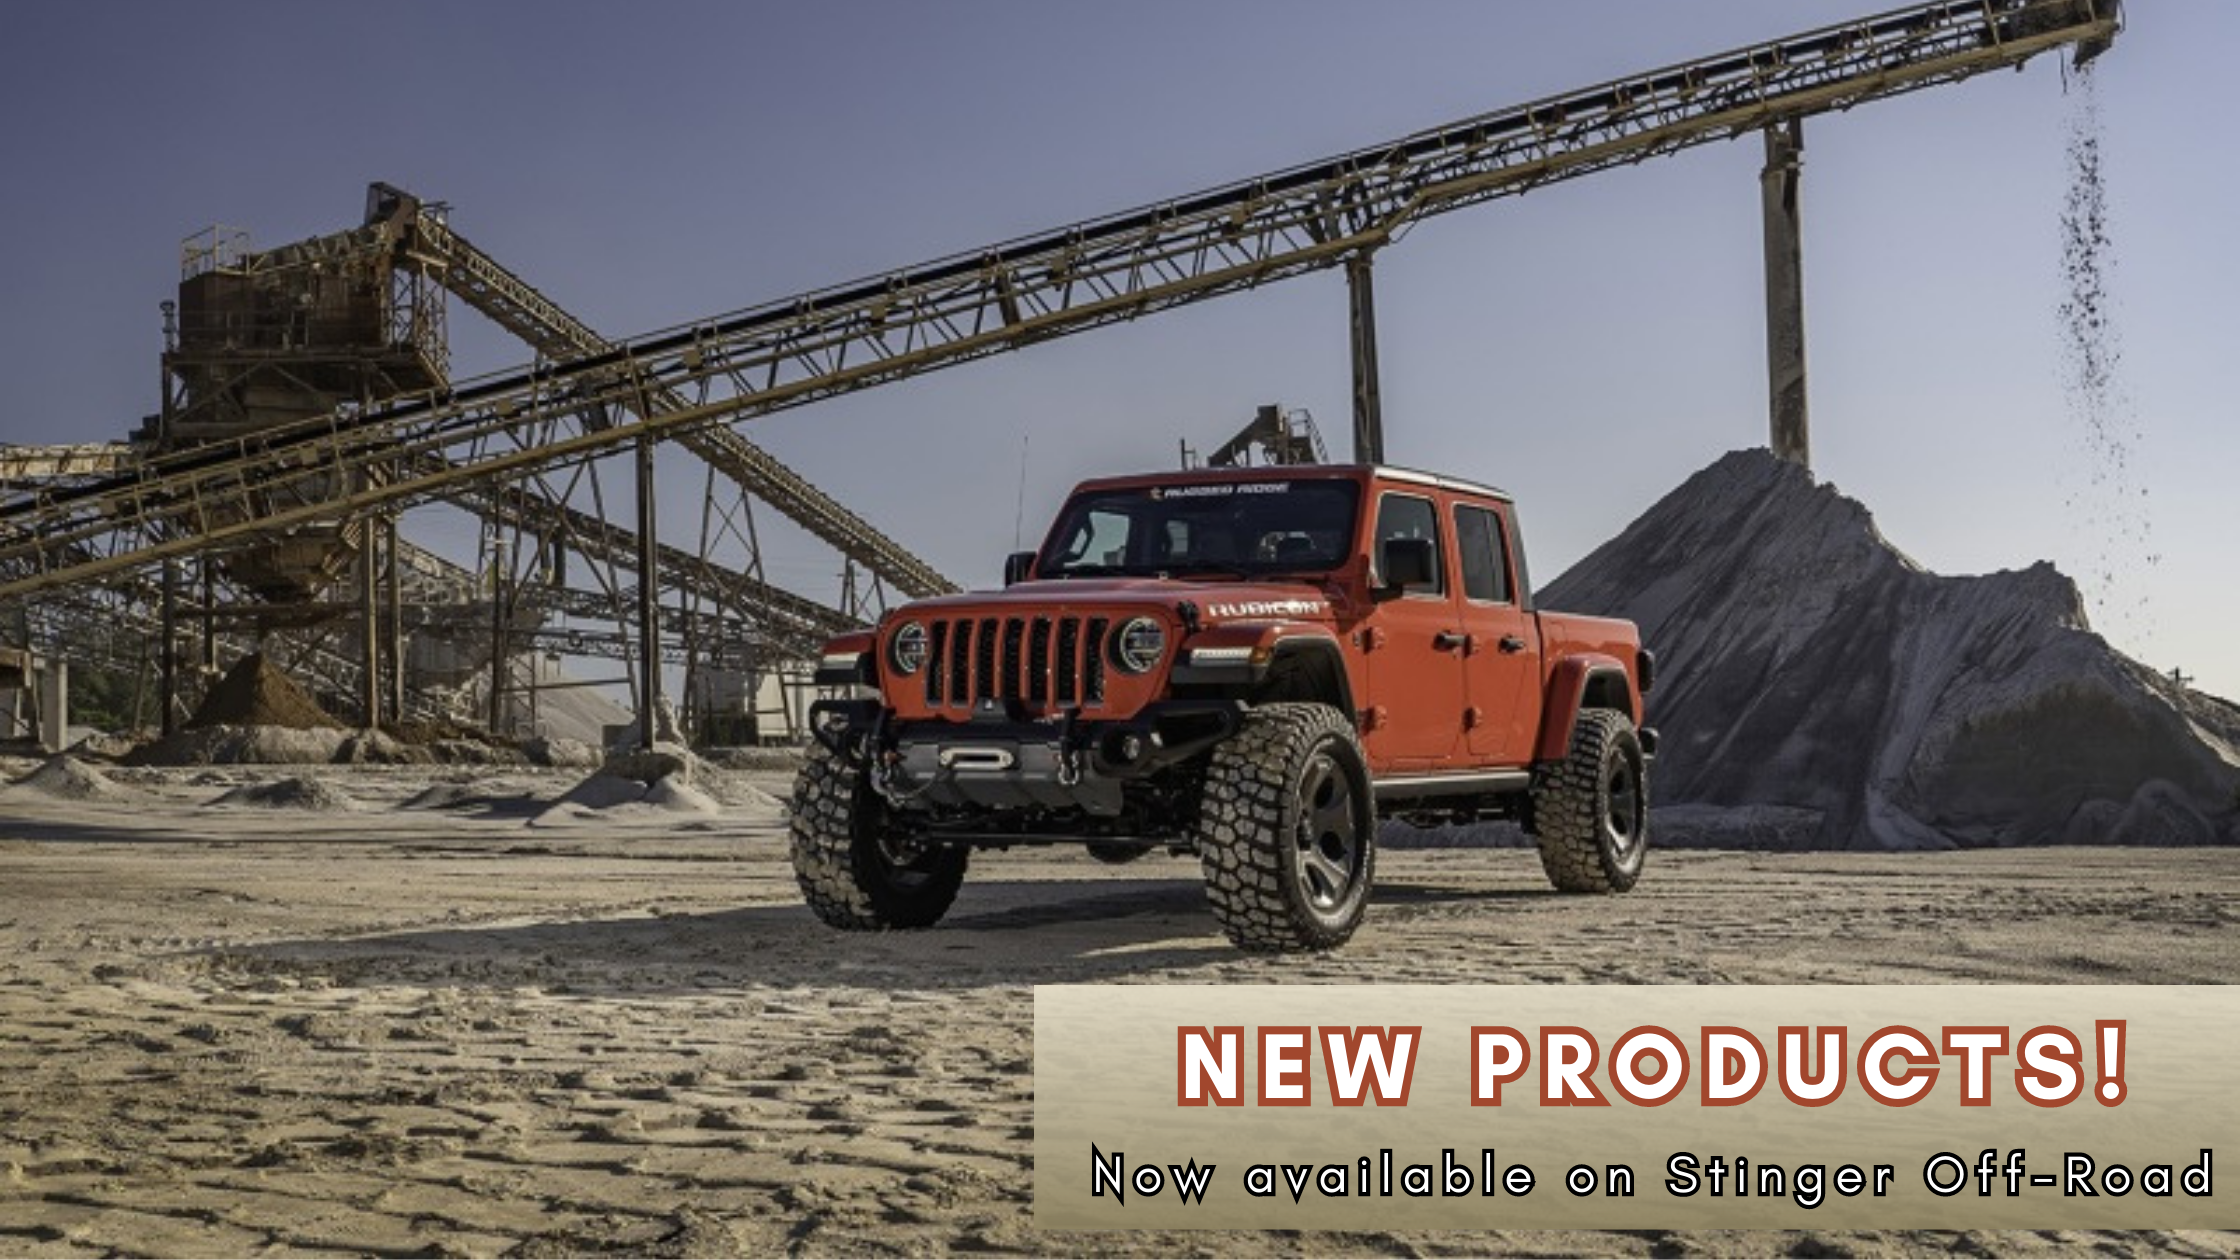 Revolutionize Your Adventures: Exciting New Product Categories Are Now Available On Stinger Off-Road!